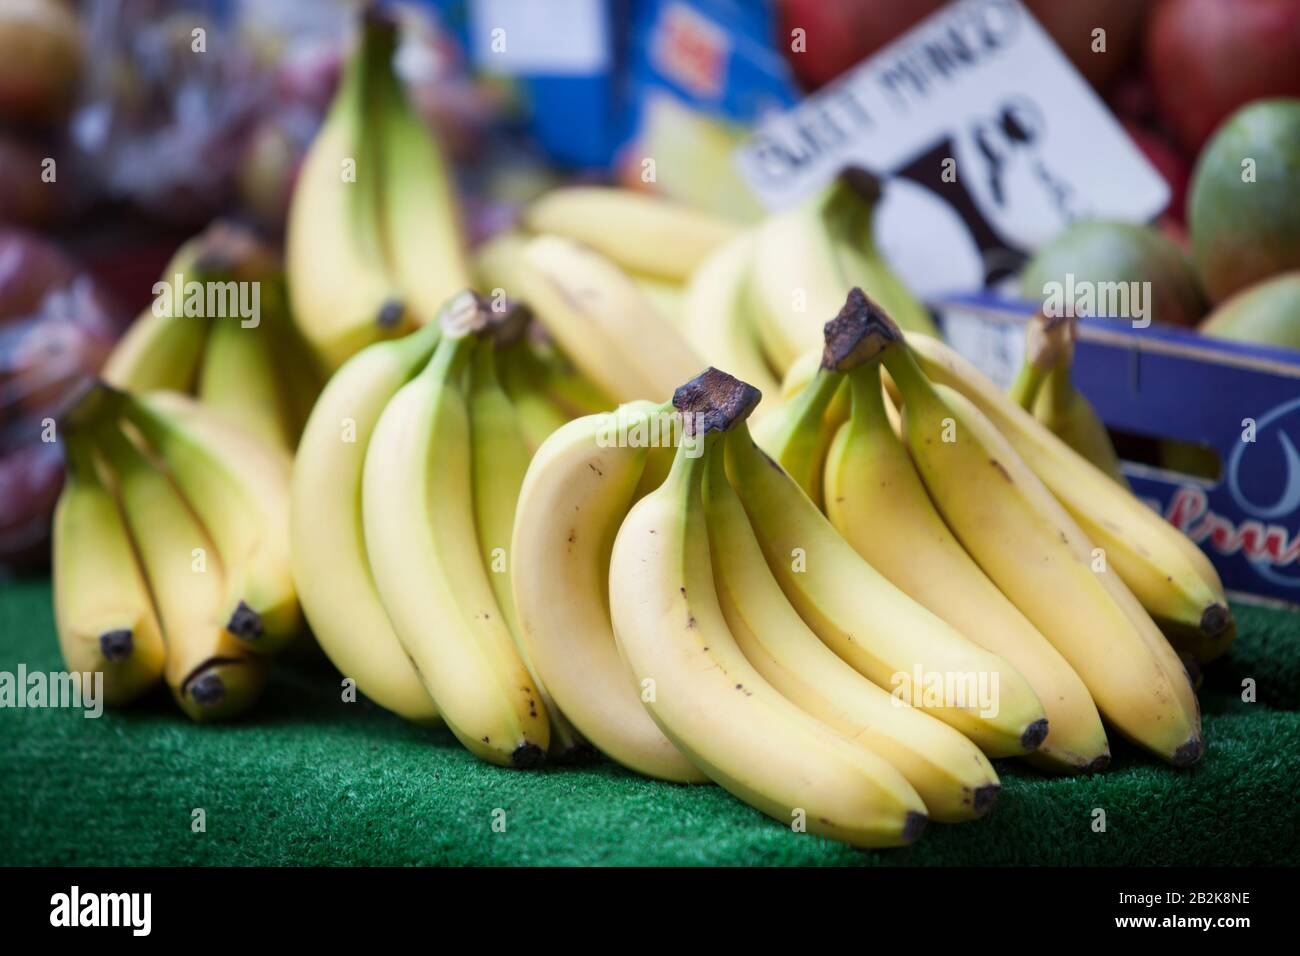 Close-up of bananas for sale Stock Photo